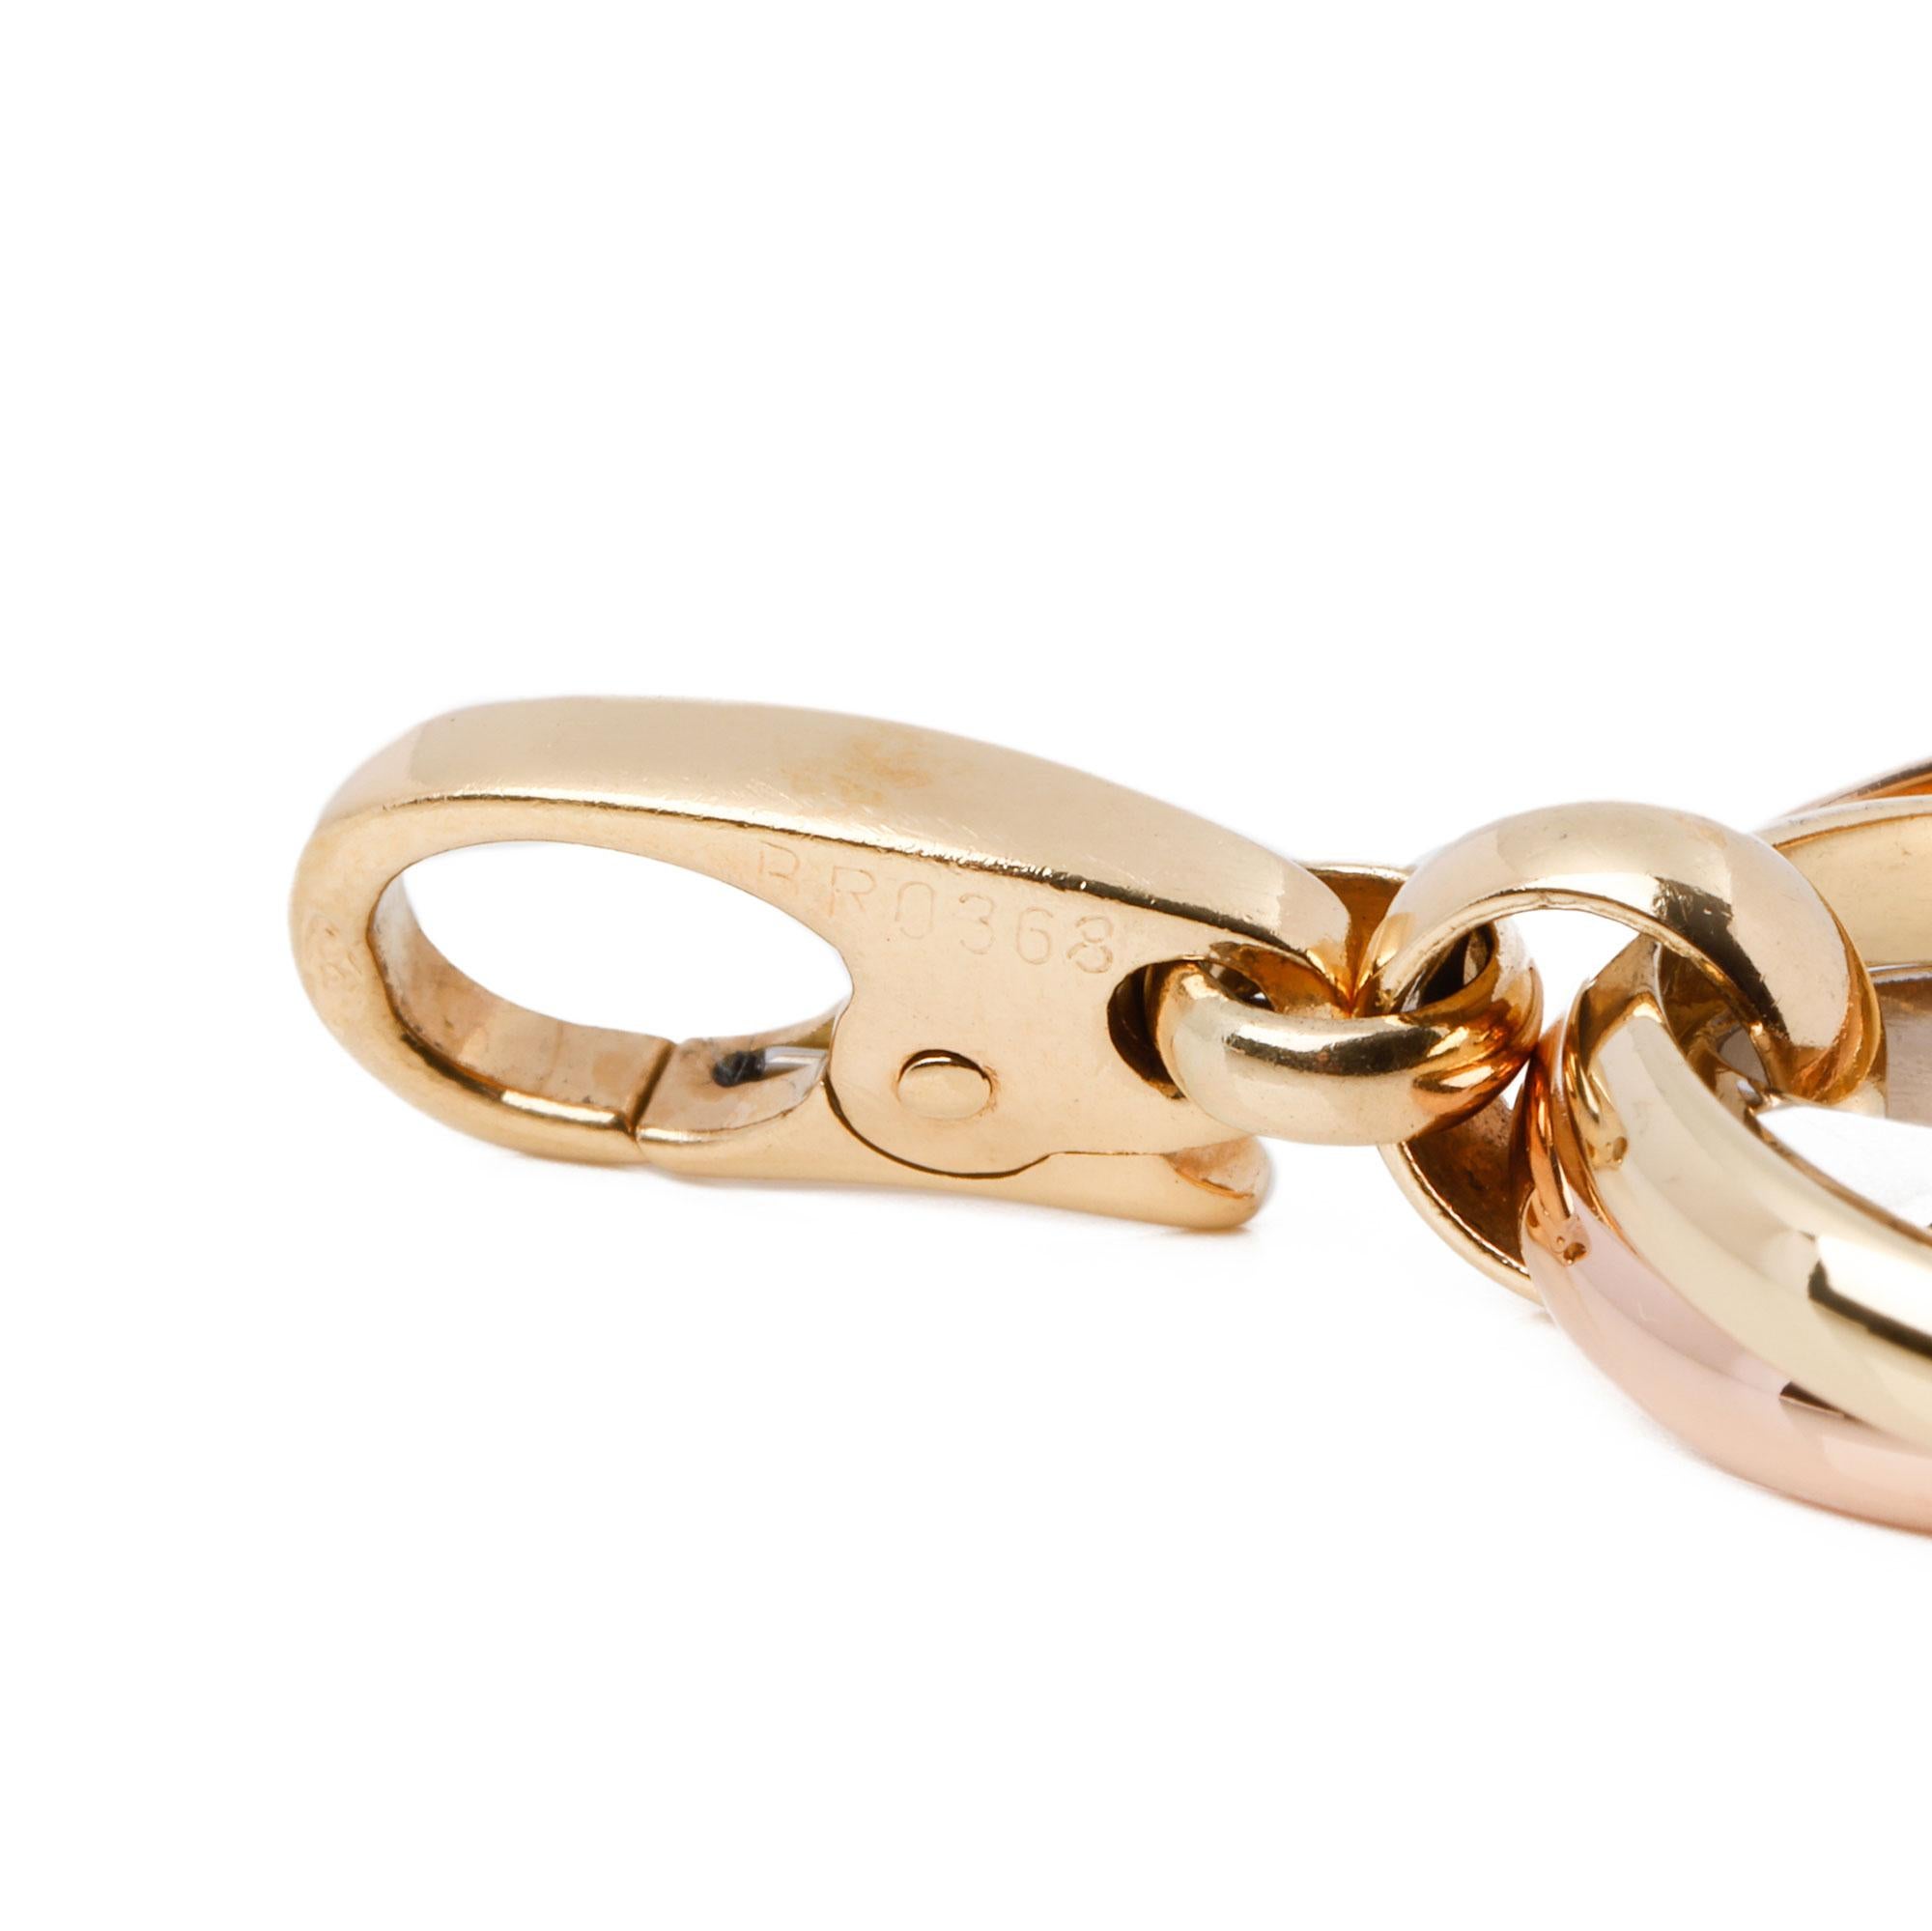 This charm by Cartier is from their Trinity range and features 3 interlinking ring in 18ct yellow, white and rose gold. It can be worn as a charm on a bracelet or as a pendant on a chain and is accompanied by a Cartier box and certificate. Our Xupes